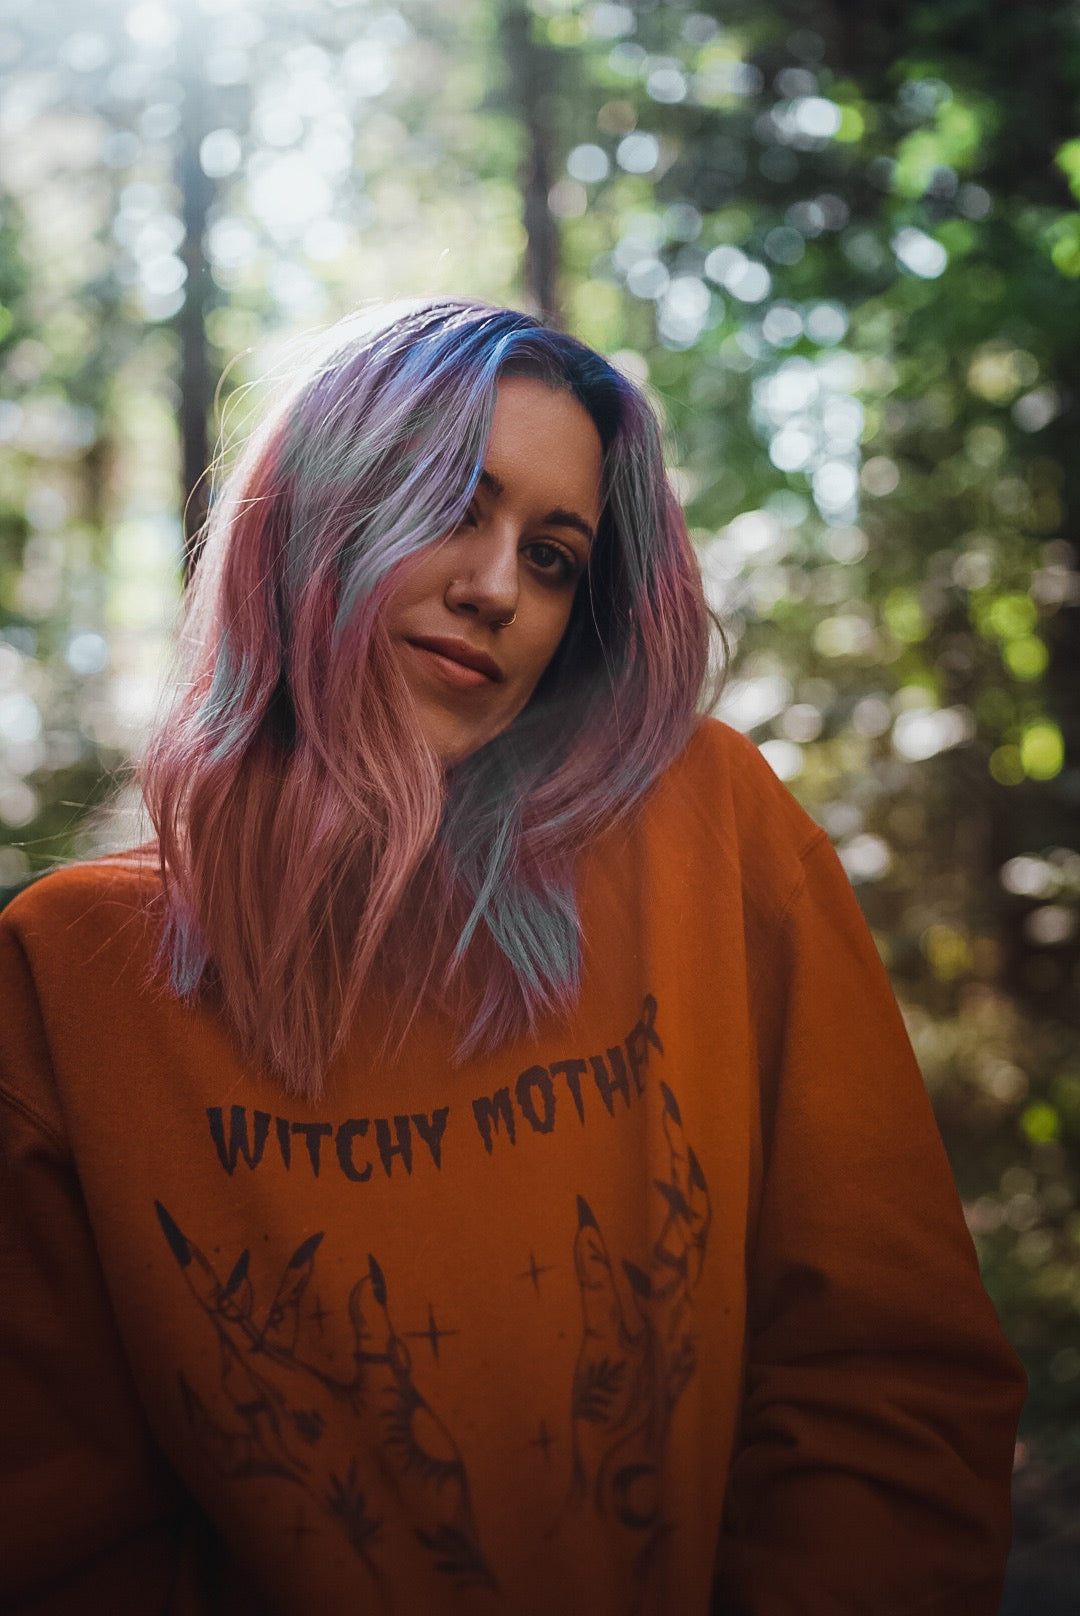 LIMITED EDITION Witchy Mother Autumn Sweatshirt